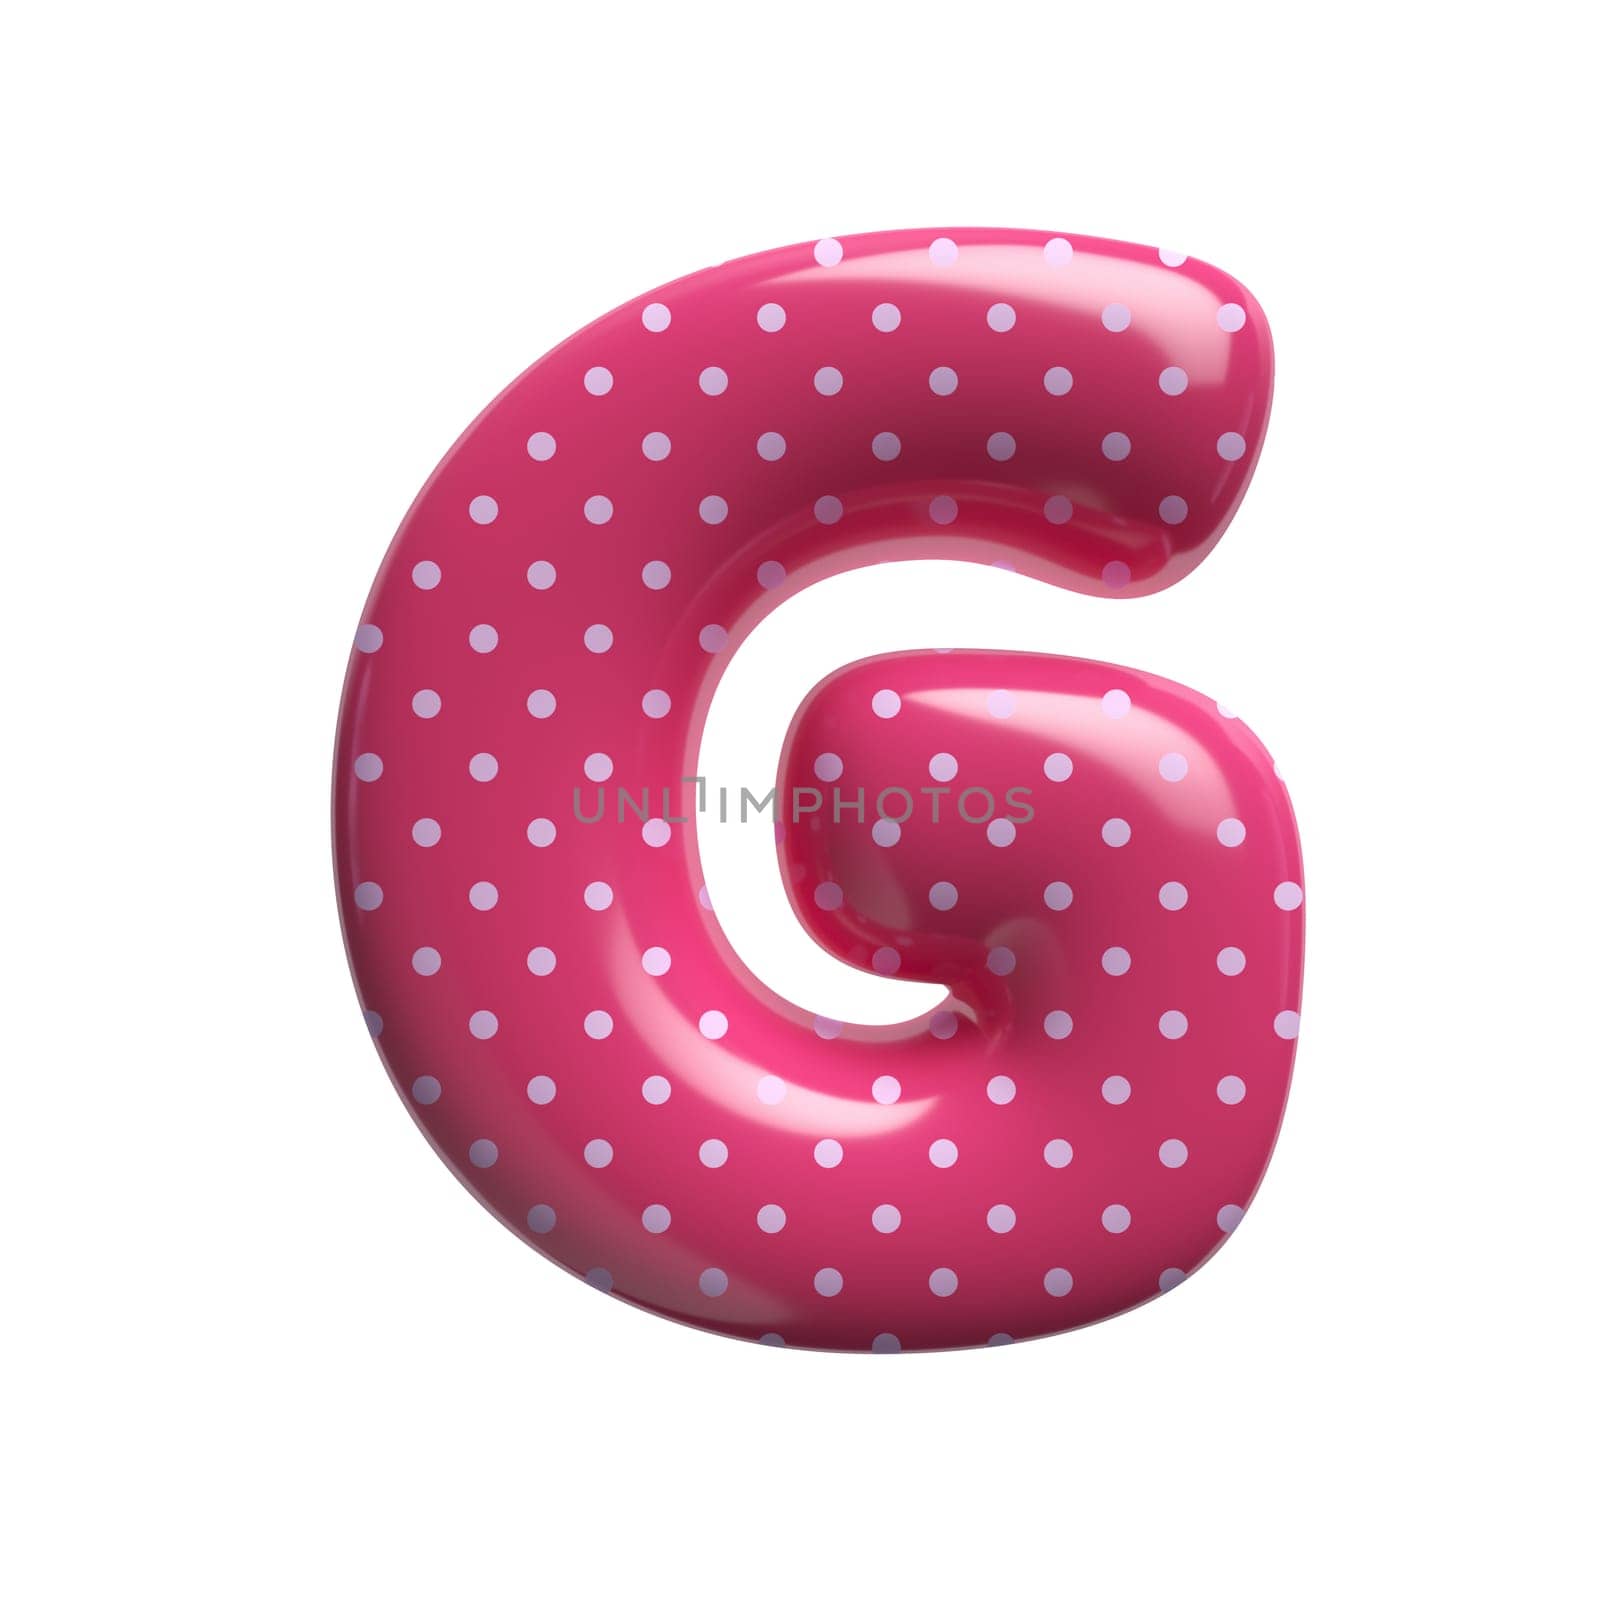 Polka dot letter G - Capital 3d pink retro font - suitable for Fashion, retro design or decoration related subjects by chrisroll